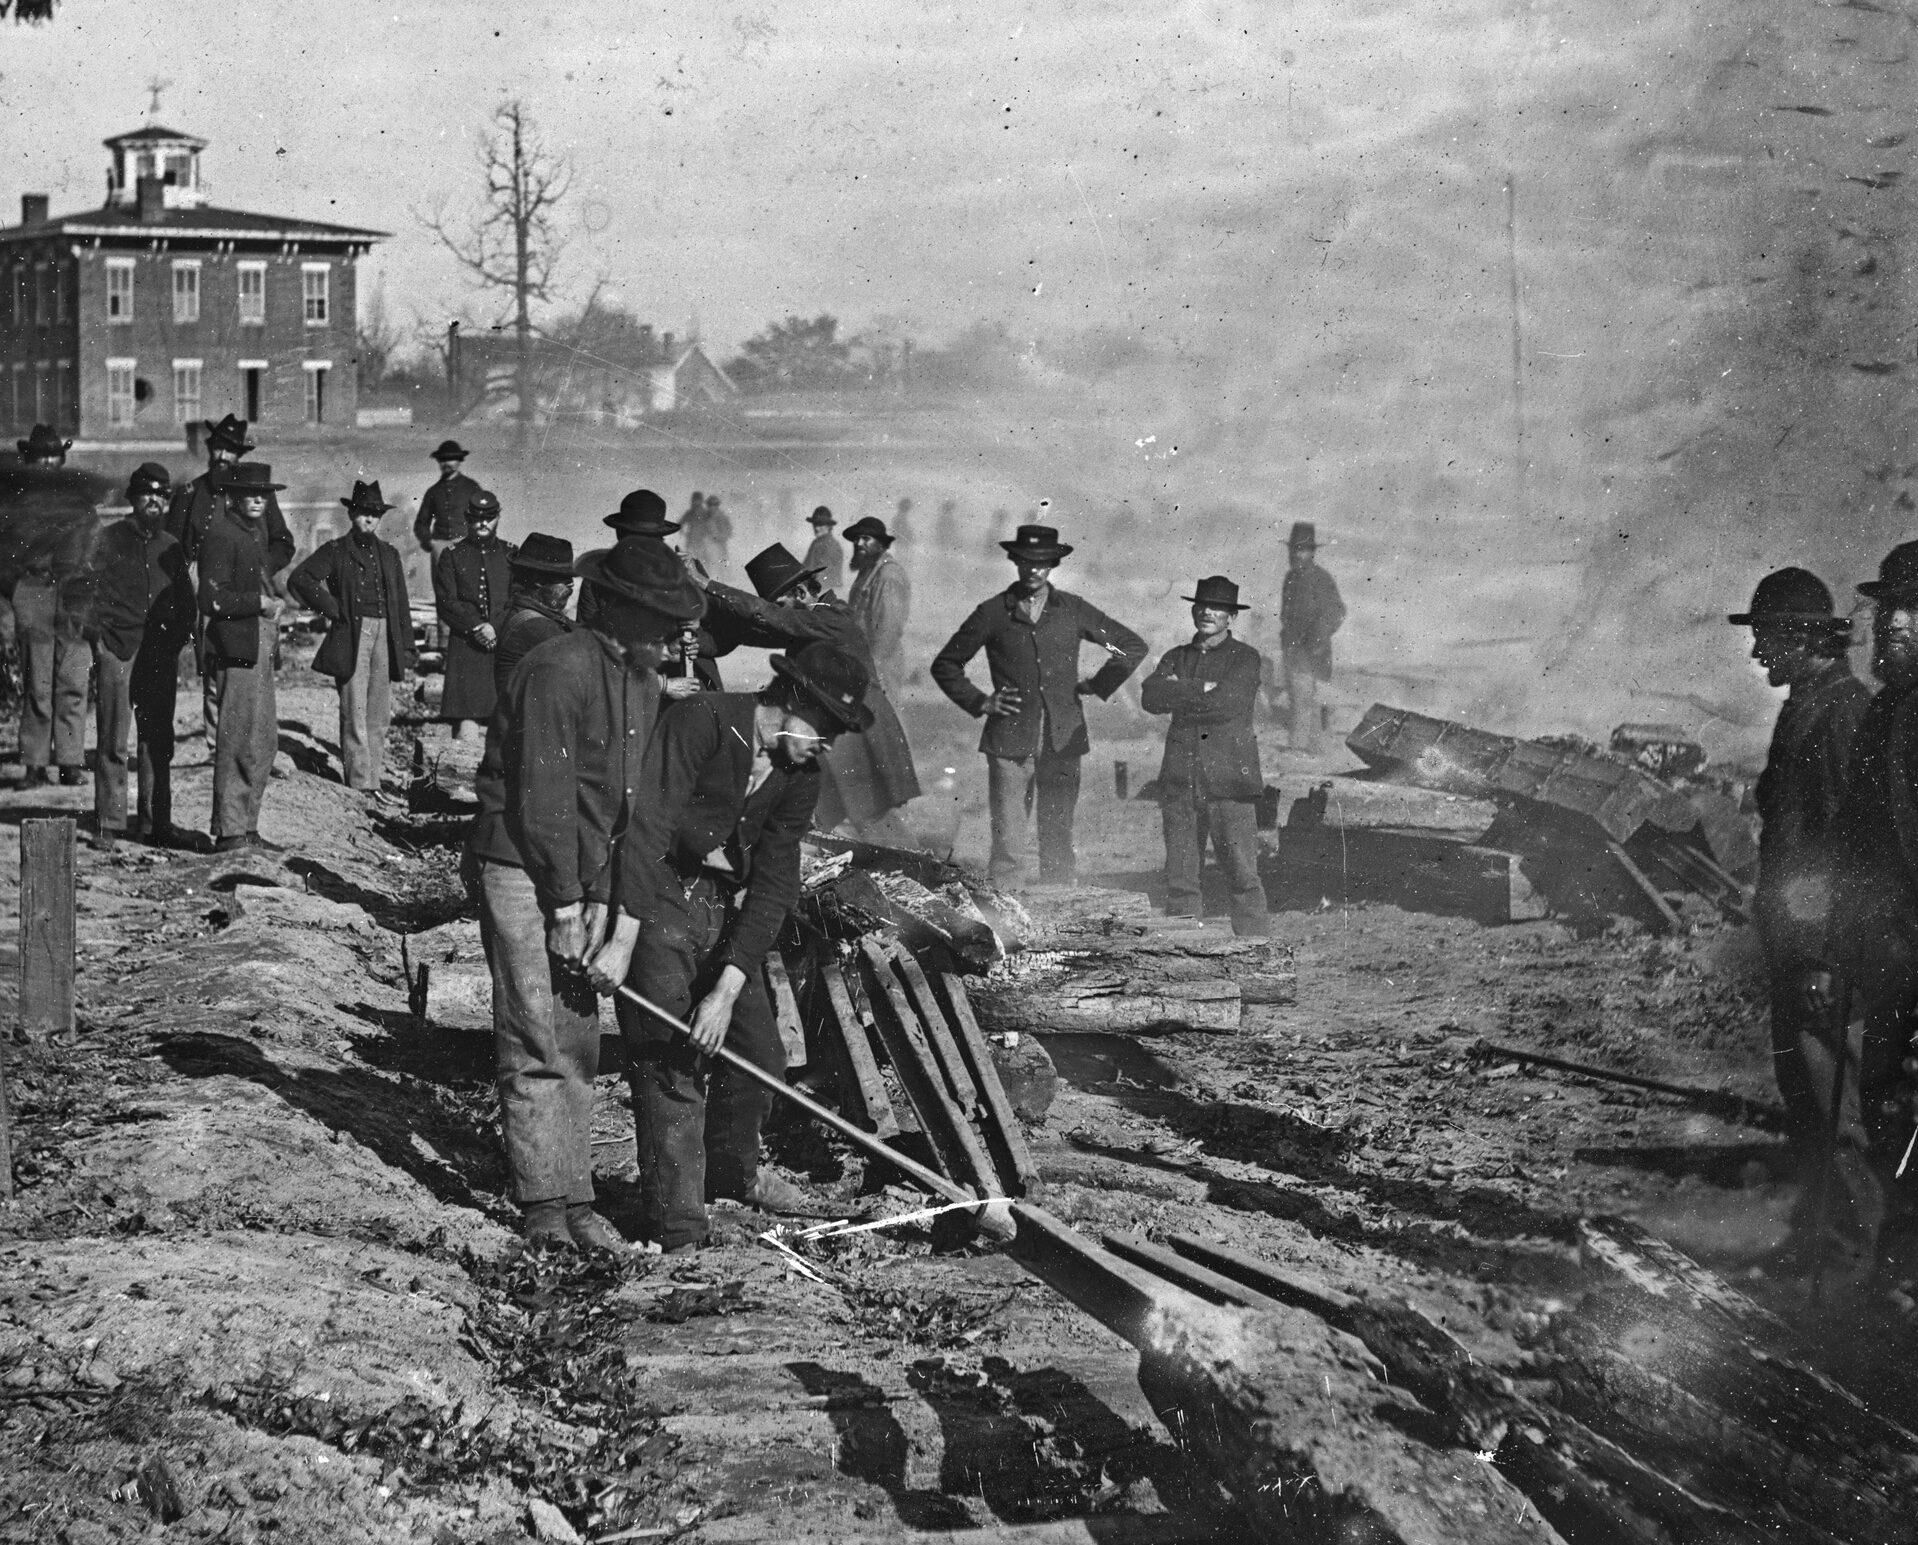 Maj. Gen. William Tecumseh Sherman’s notorious “bummers” destroy a section of railroad at Atlanta, Georgia, in the summer of 1864. Photographer George N. Barnard was one of the few to record the Civil War in the Western theater.